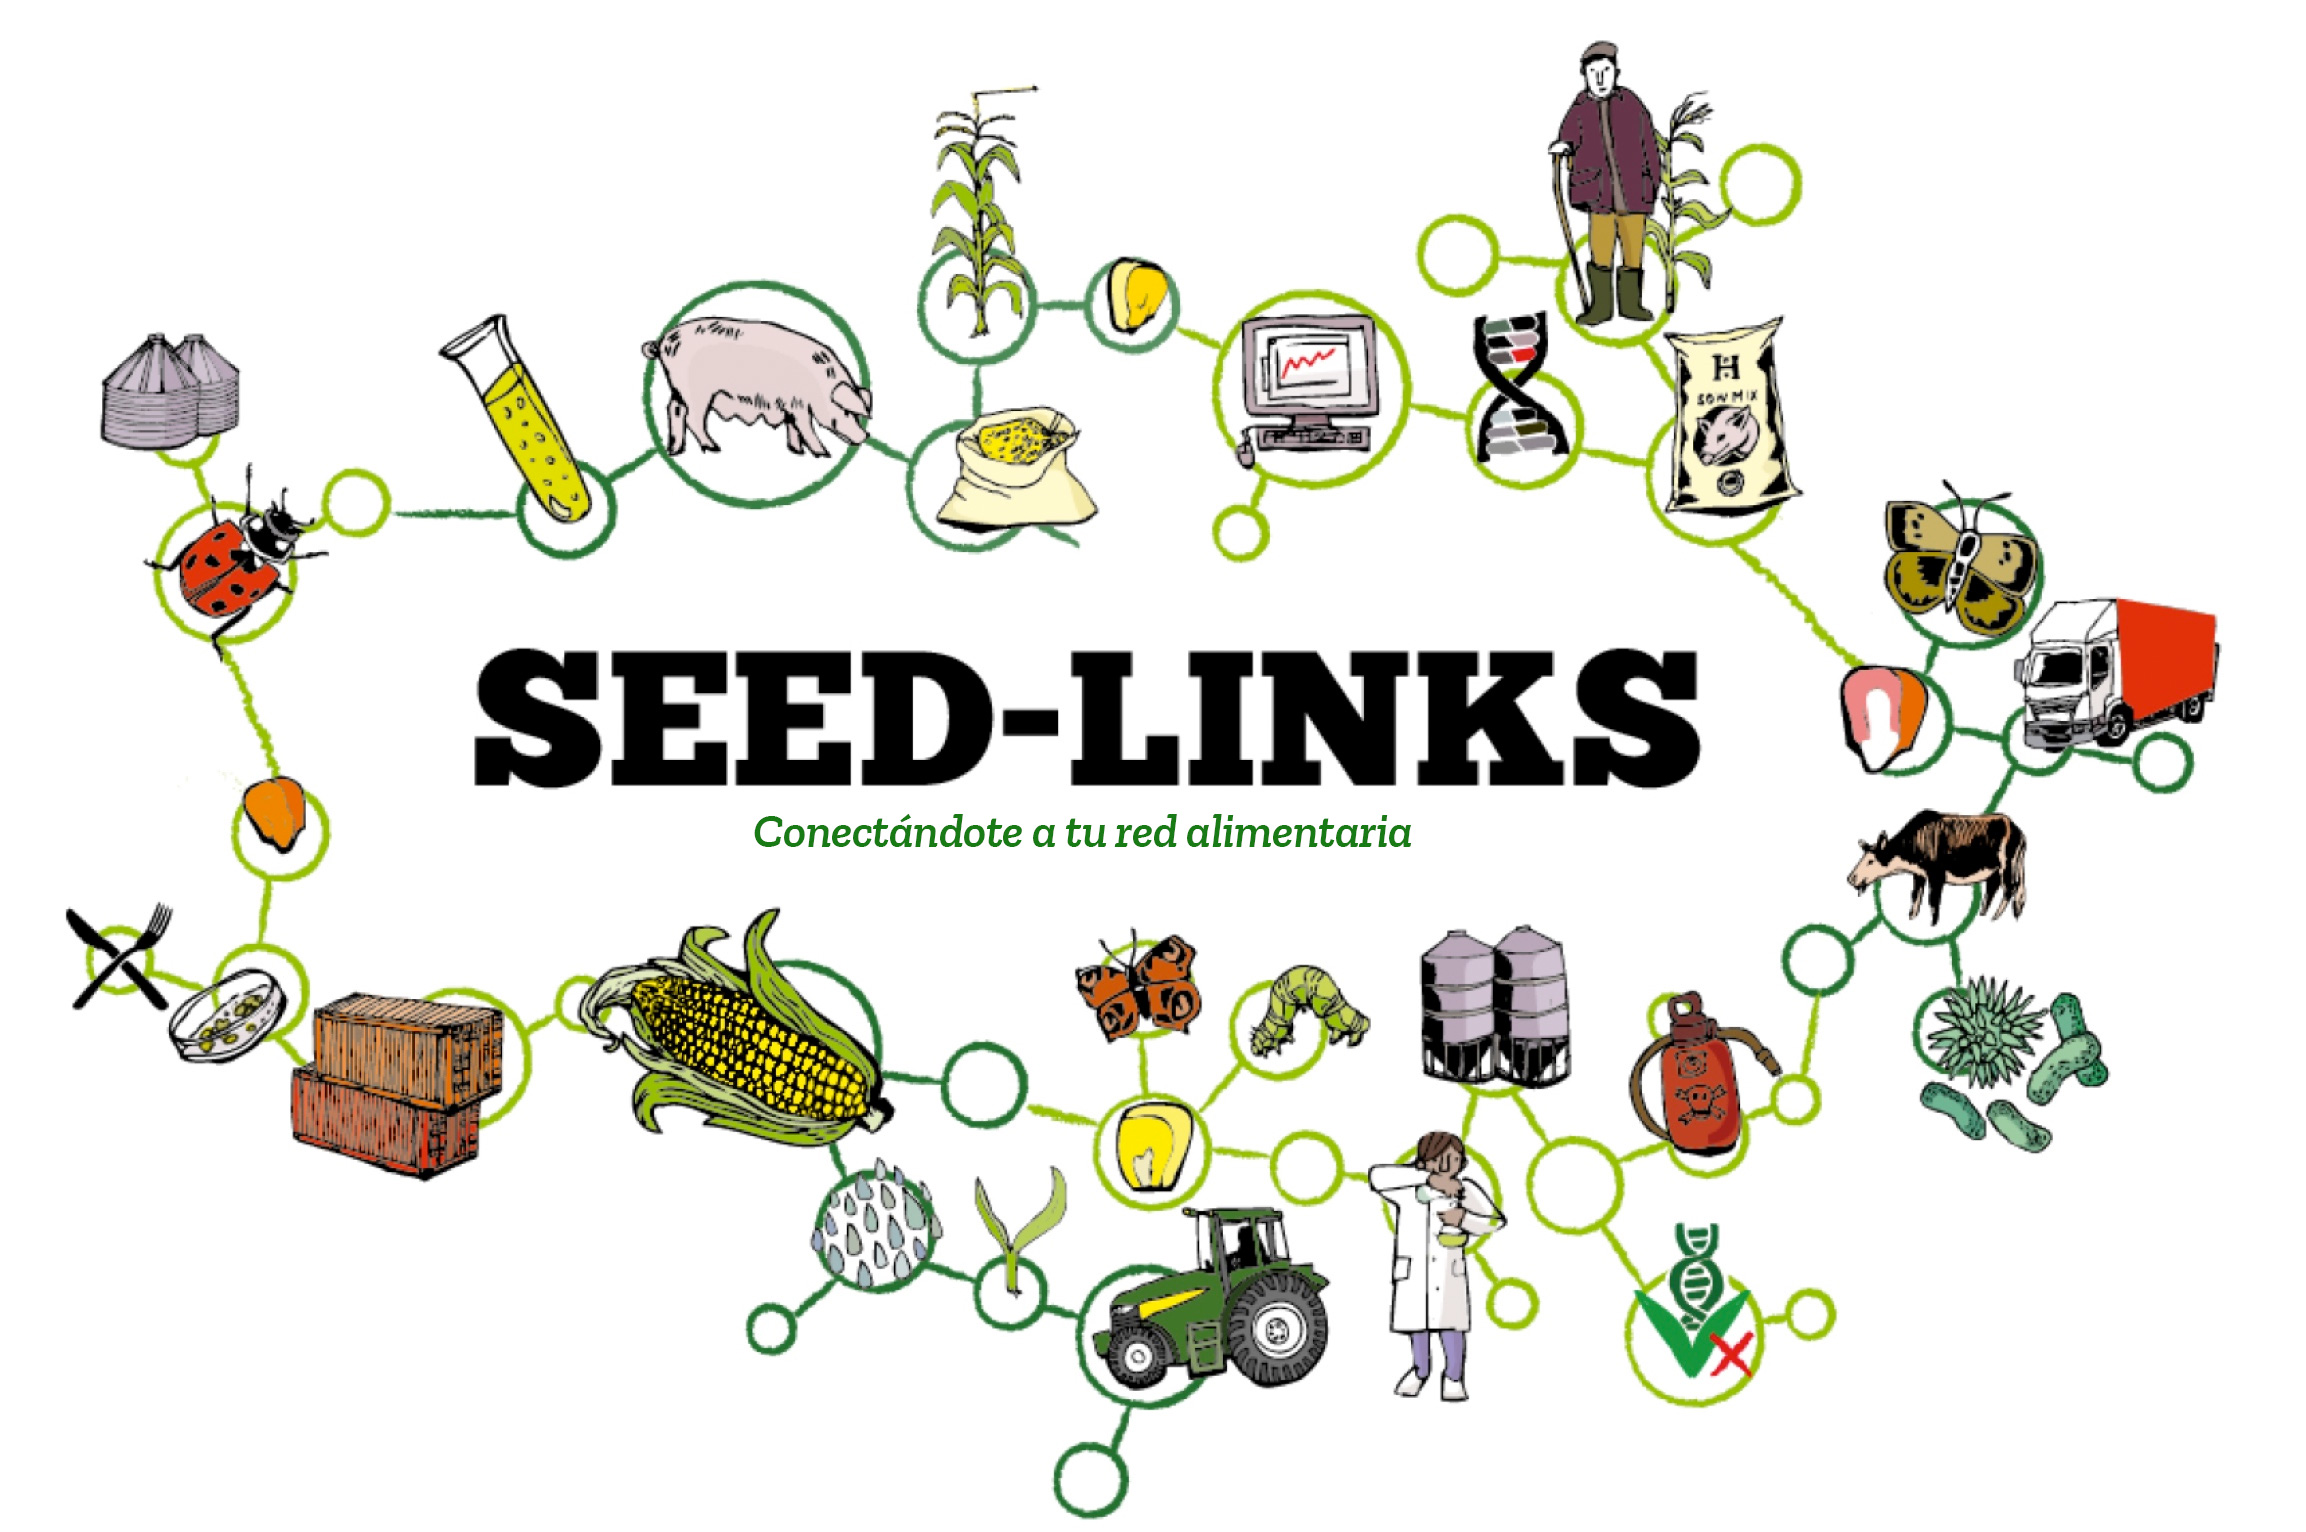 Seed-Links - Connecting you to your agri-food web